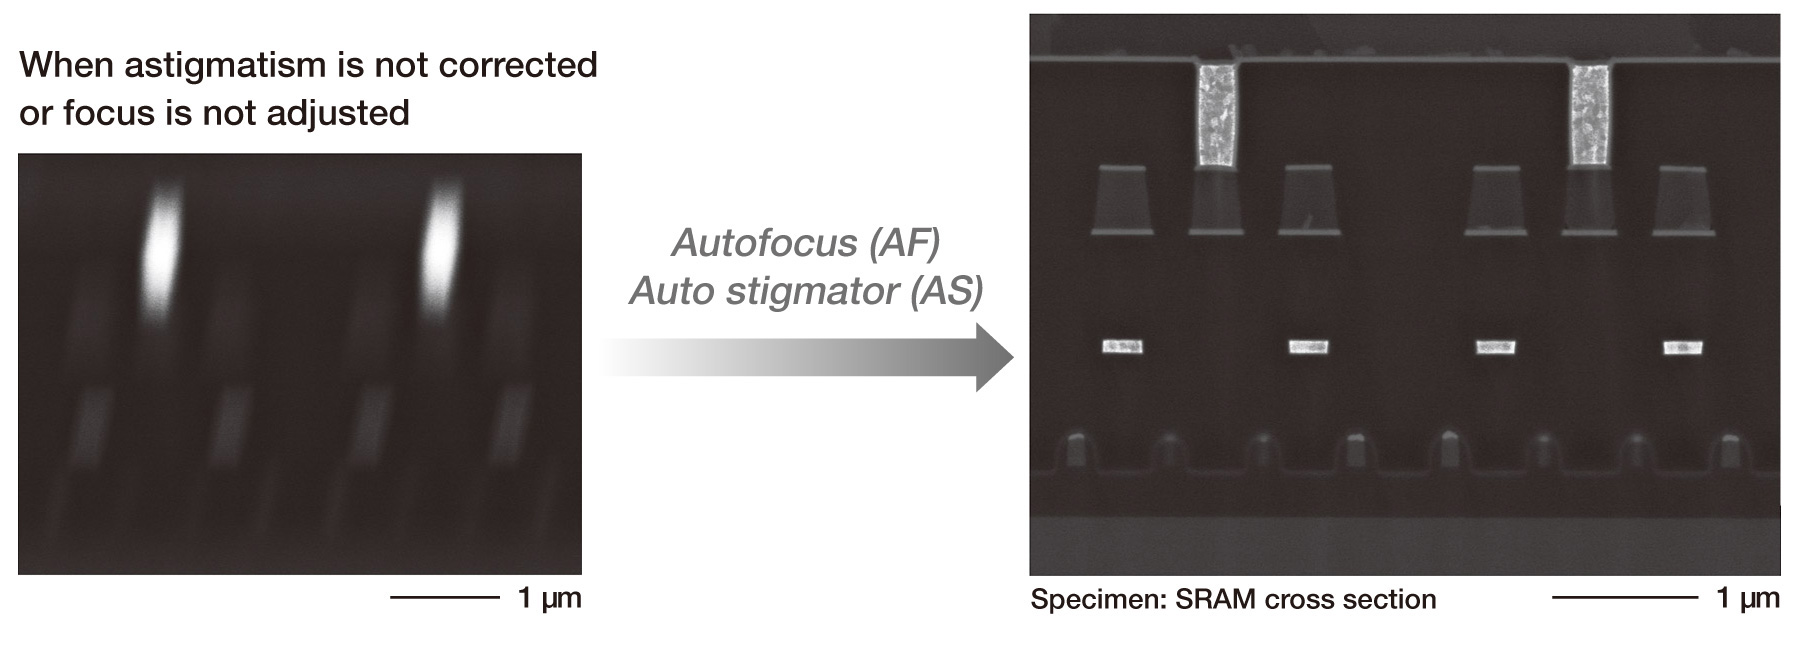 When astigmatism is not corrected  or focus is not adjusted: Autofocus (AF) Auto stigmator (AS)